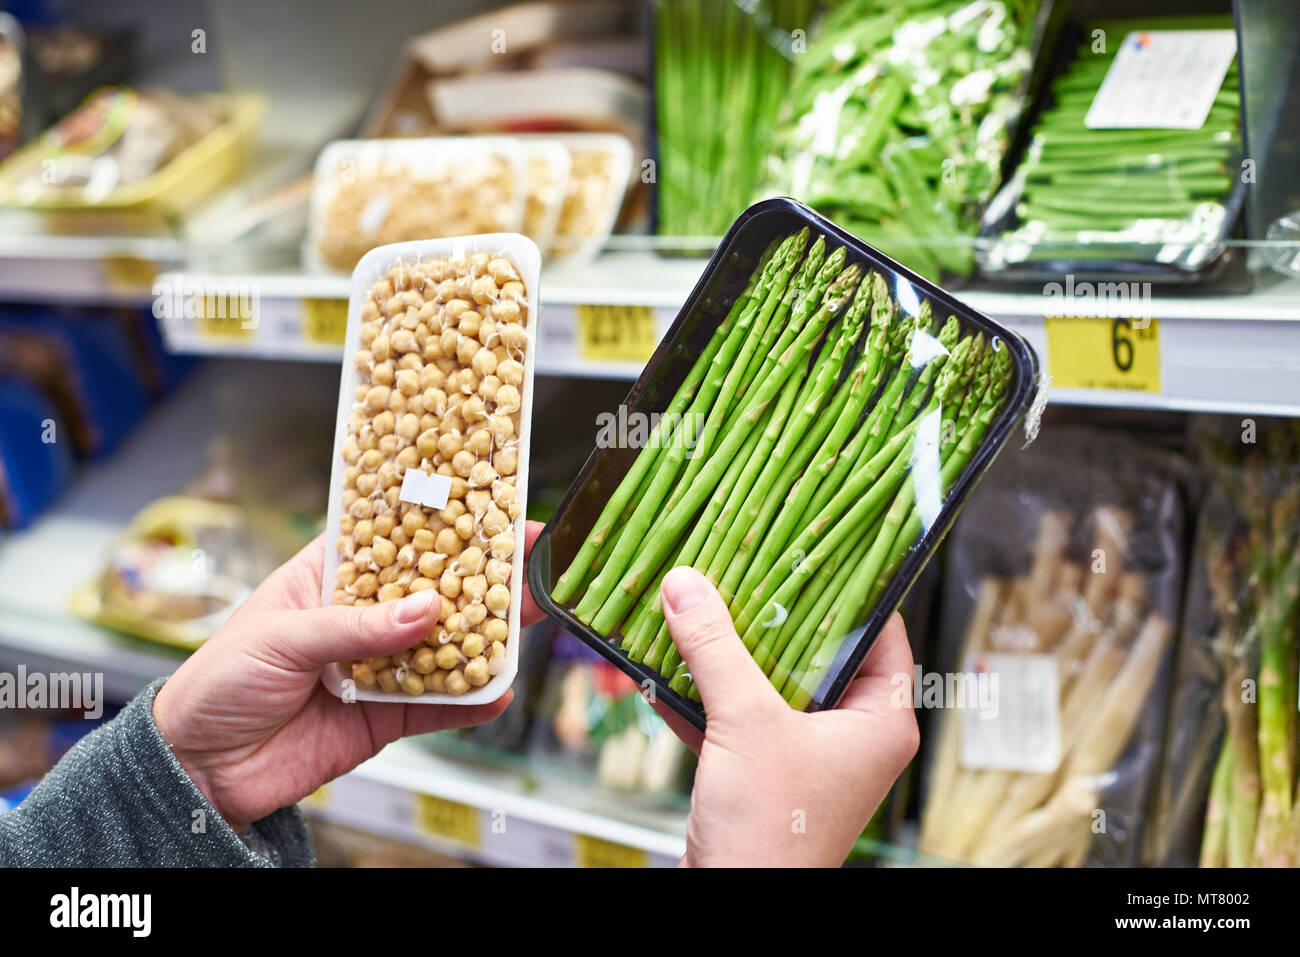 Buyers hands with asparagus and sprouted peas in shop Stock Photo